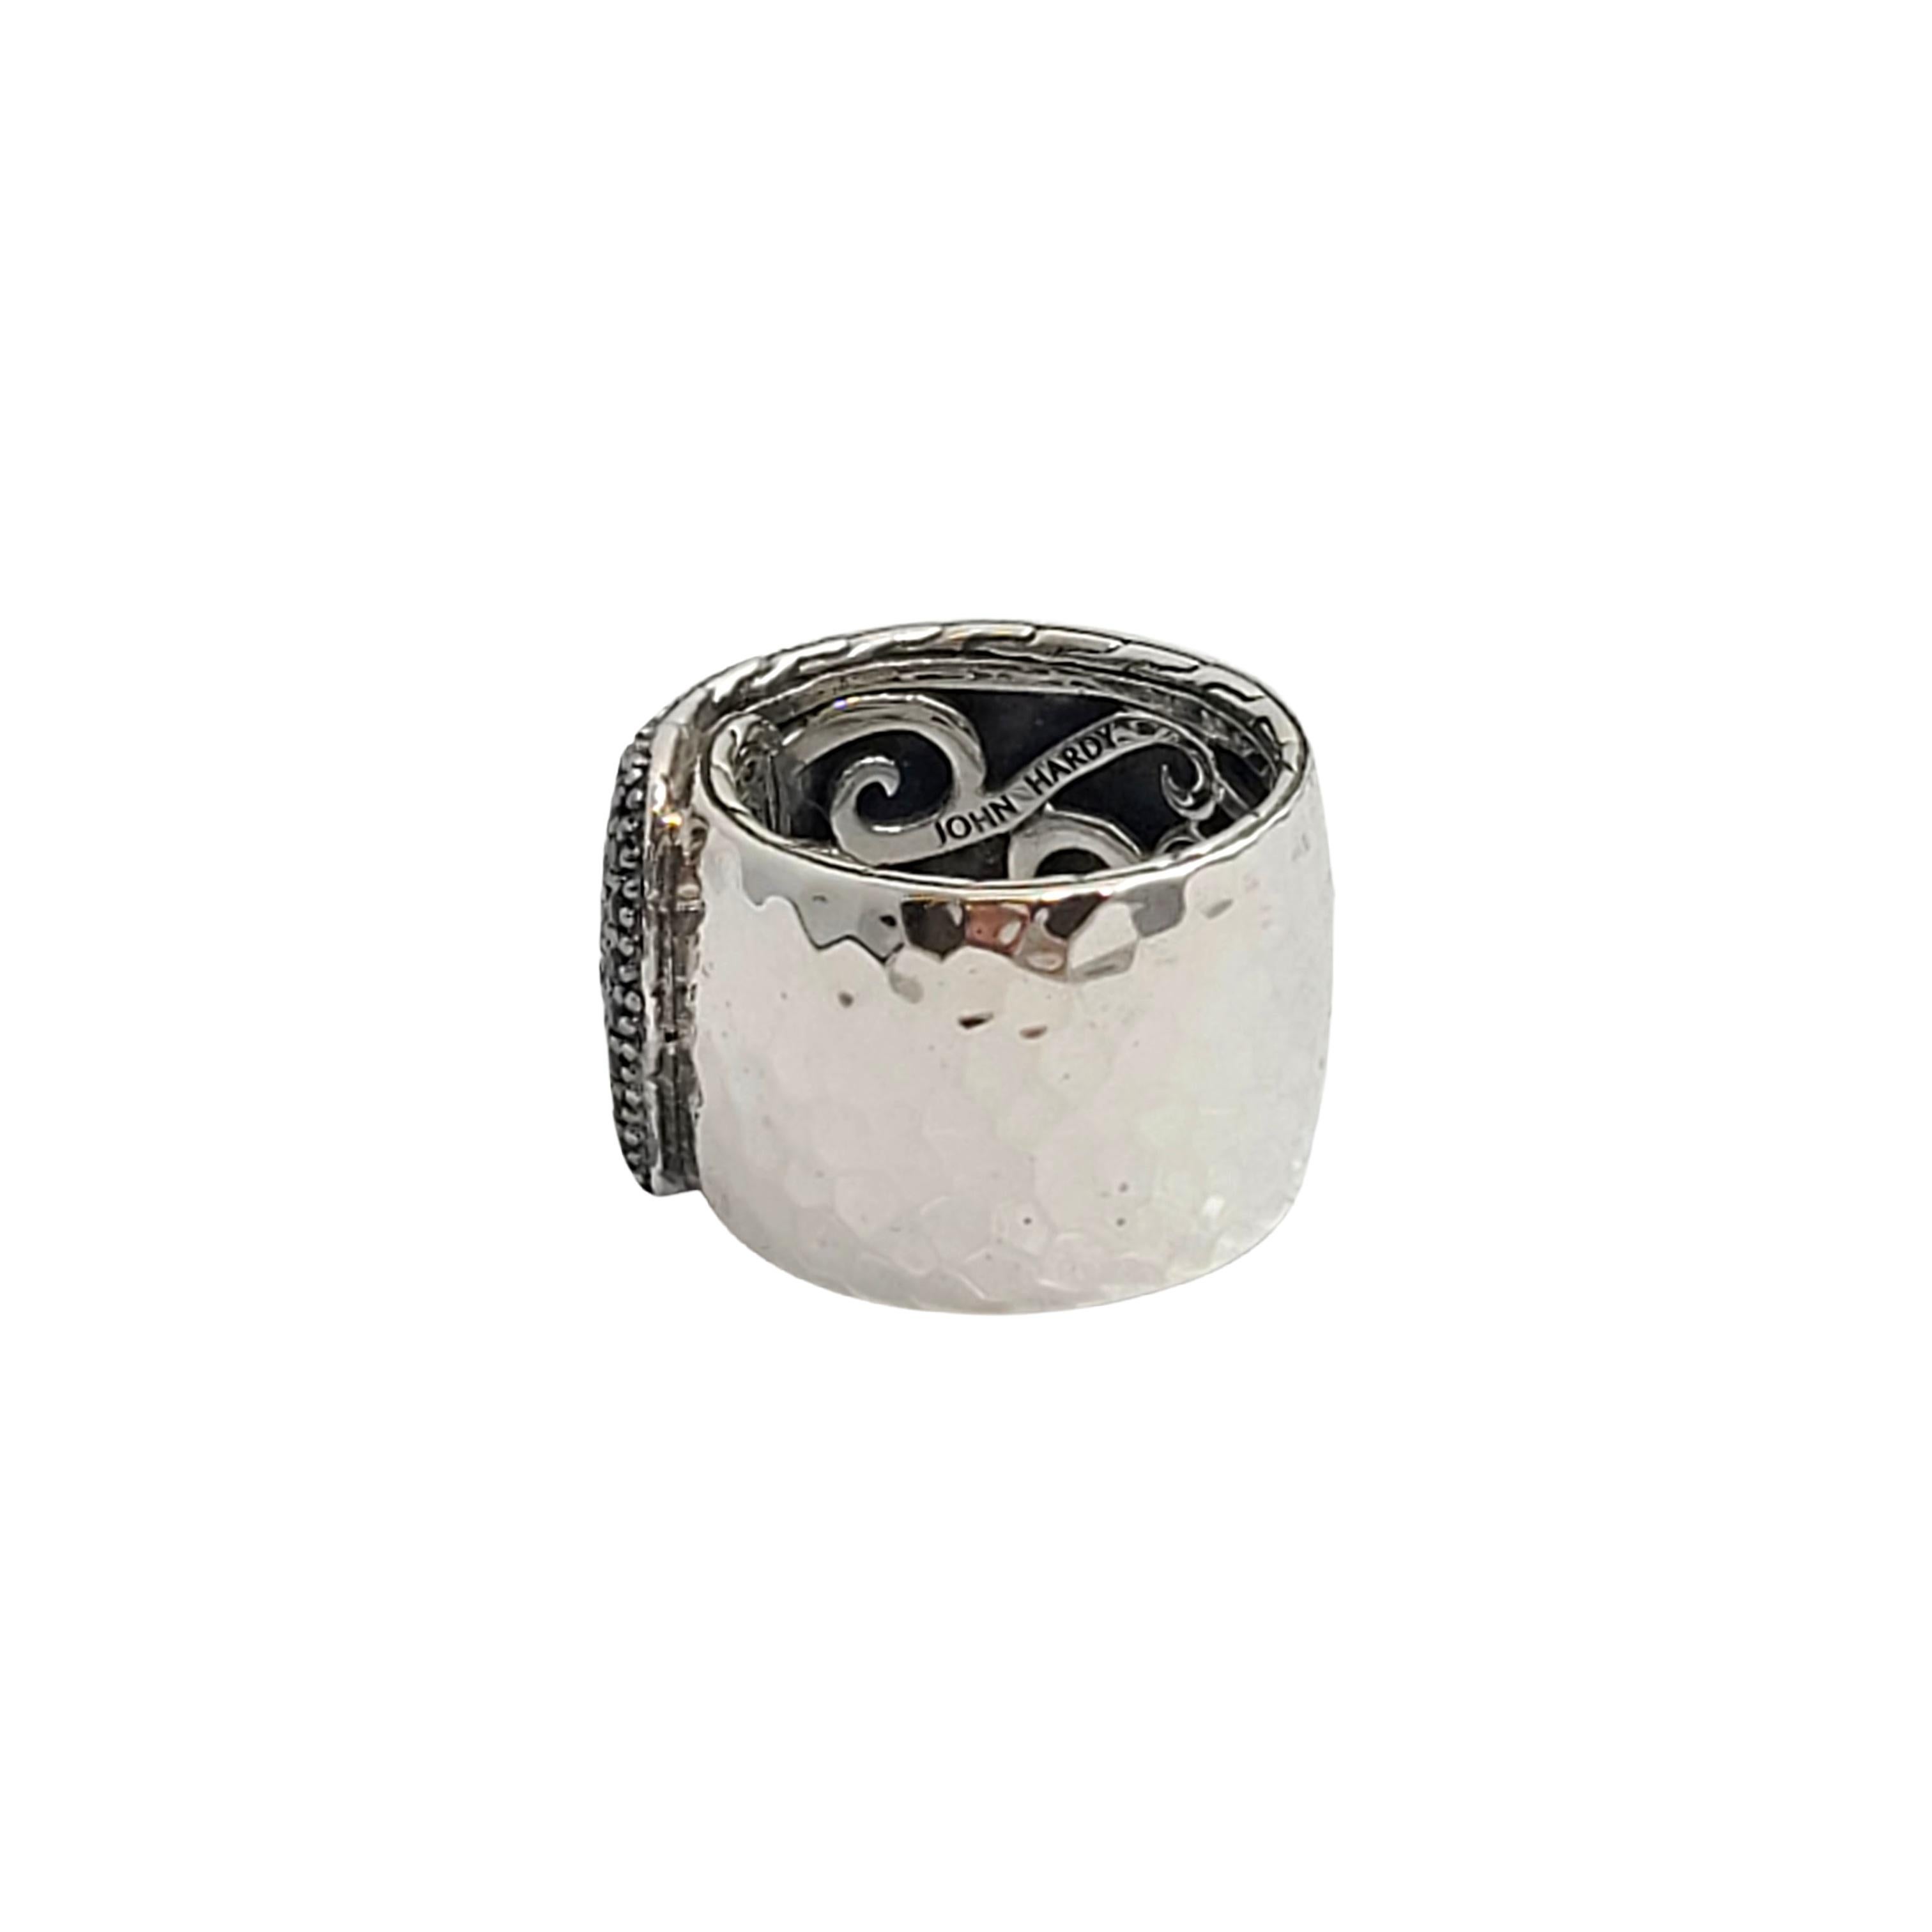 Sterling silver Palu Lava black sapphire overlap band ring by John Hardy.

Size 7

This beautiful sterling silver band has a slightly hammered finish and features 3 rows of small round faceted black sapphires with an overlap design.

Measures approx